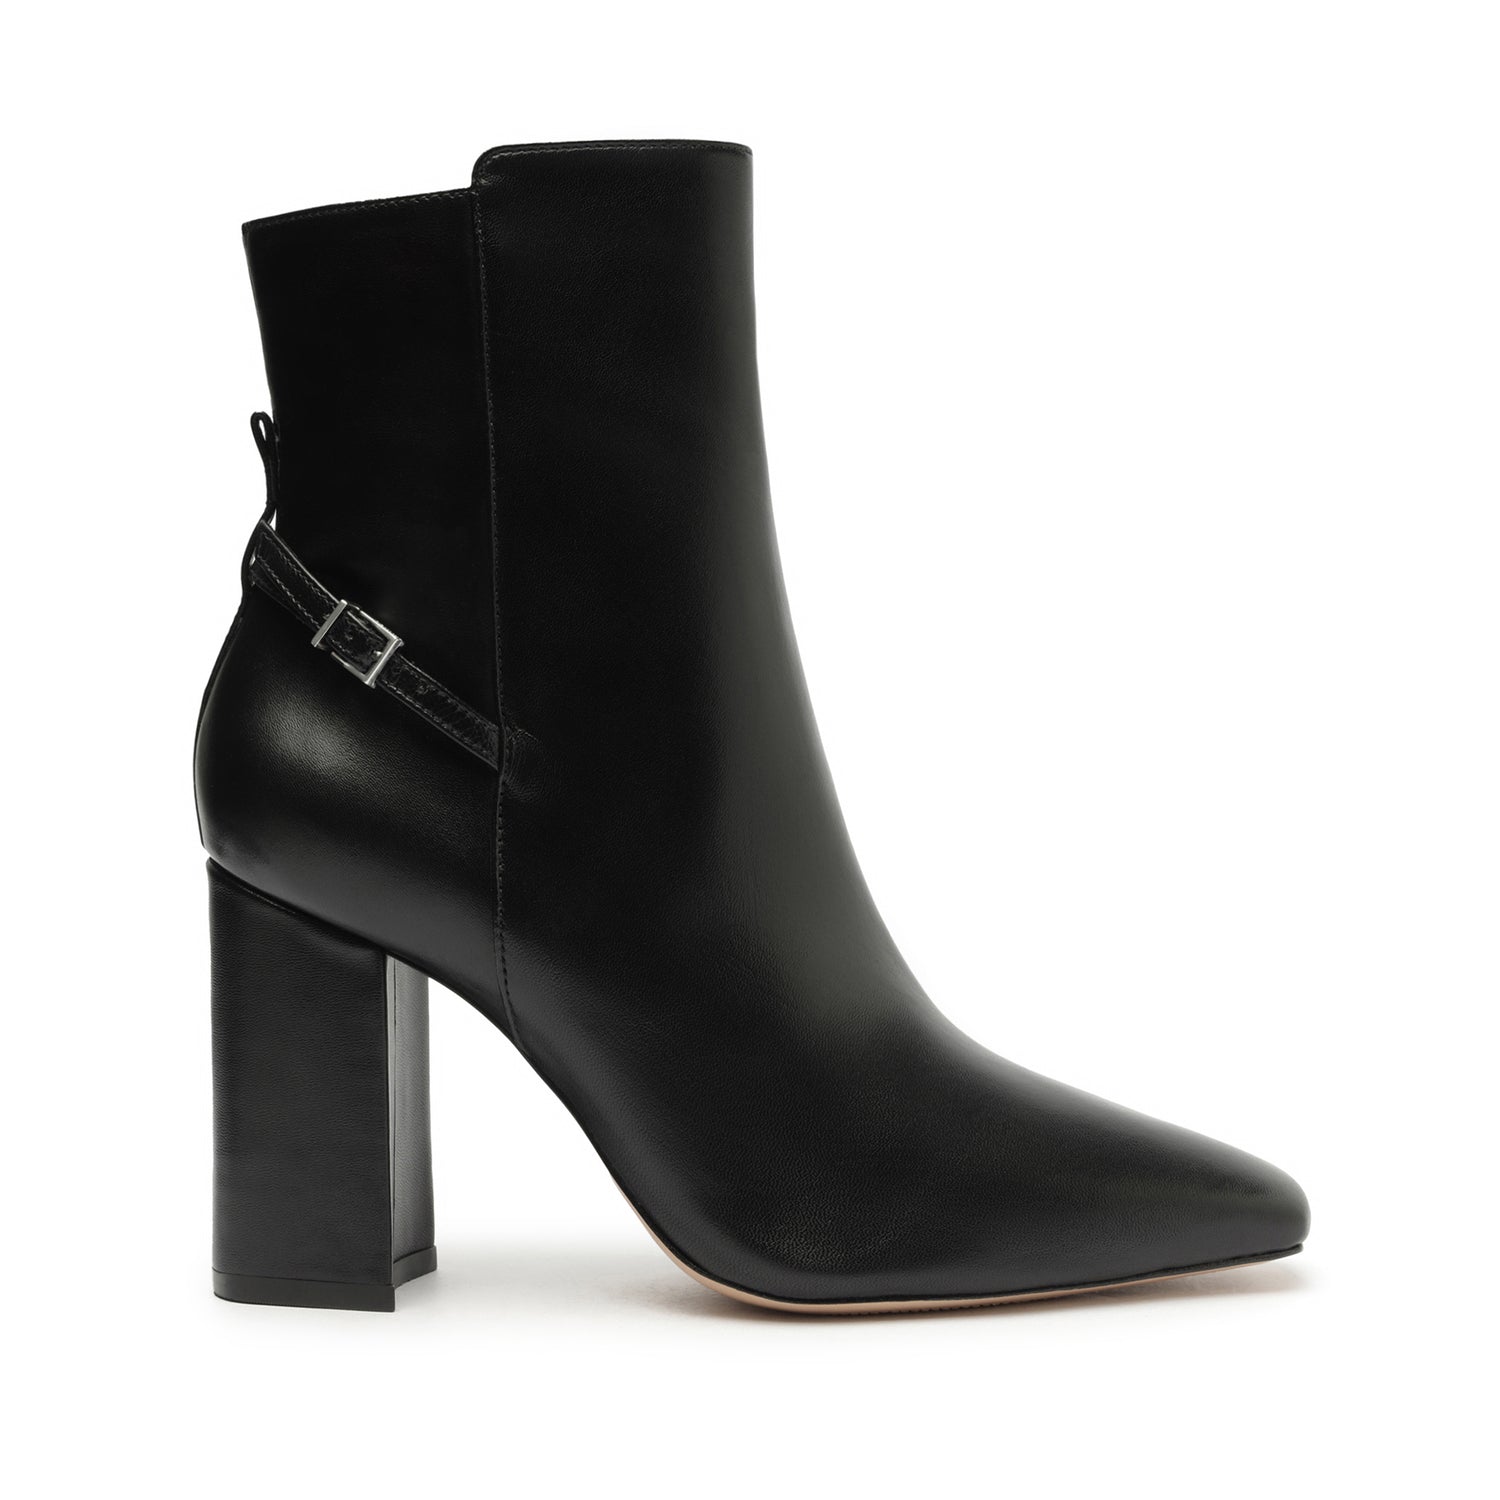 Christine Nappa Leather Bootie Booties Open Stock 5 Black Nappa Leather - Schutz Shoes